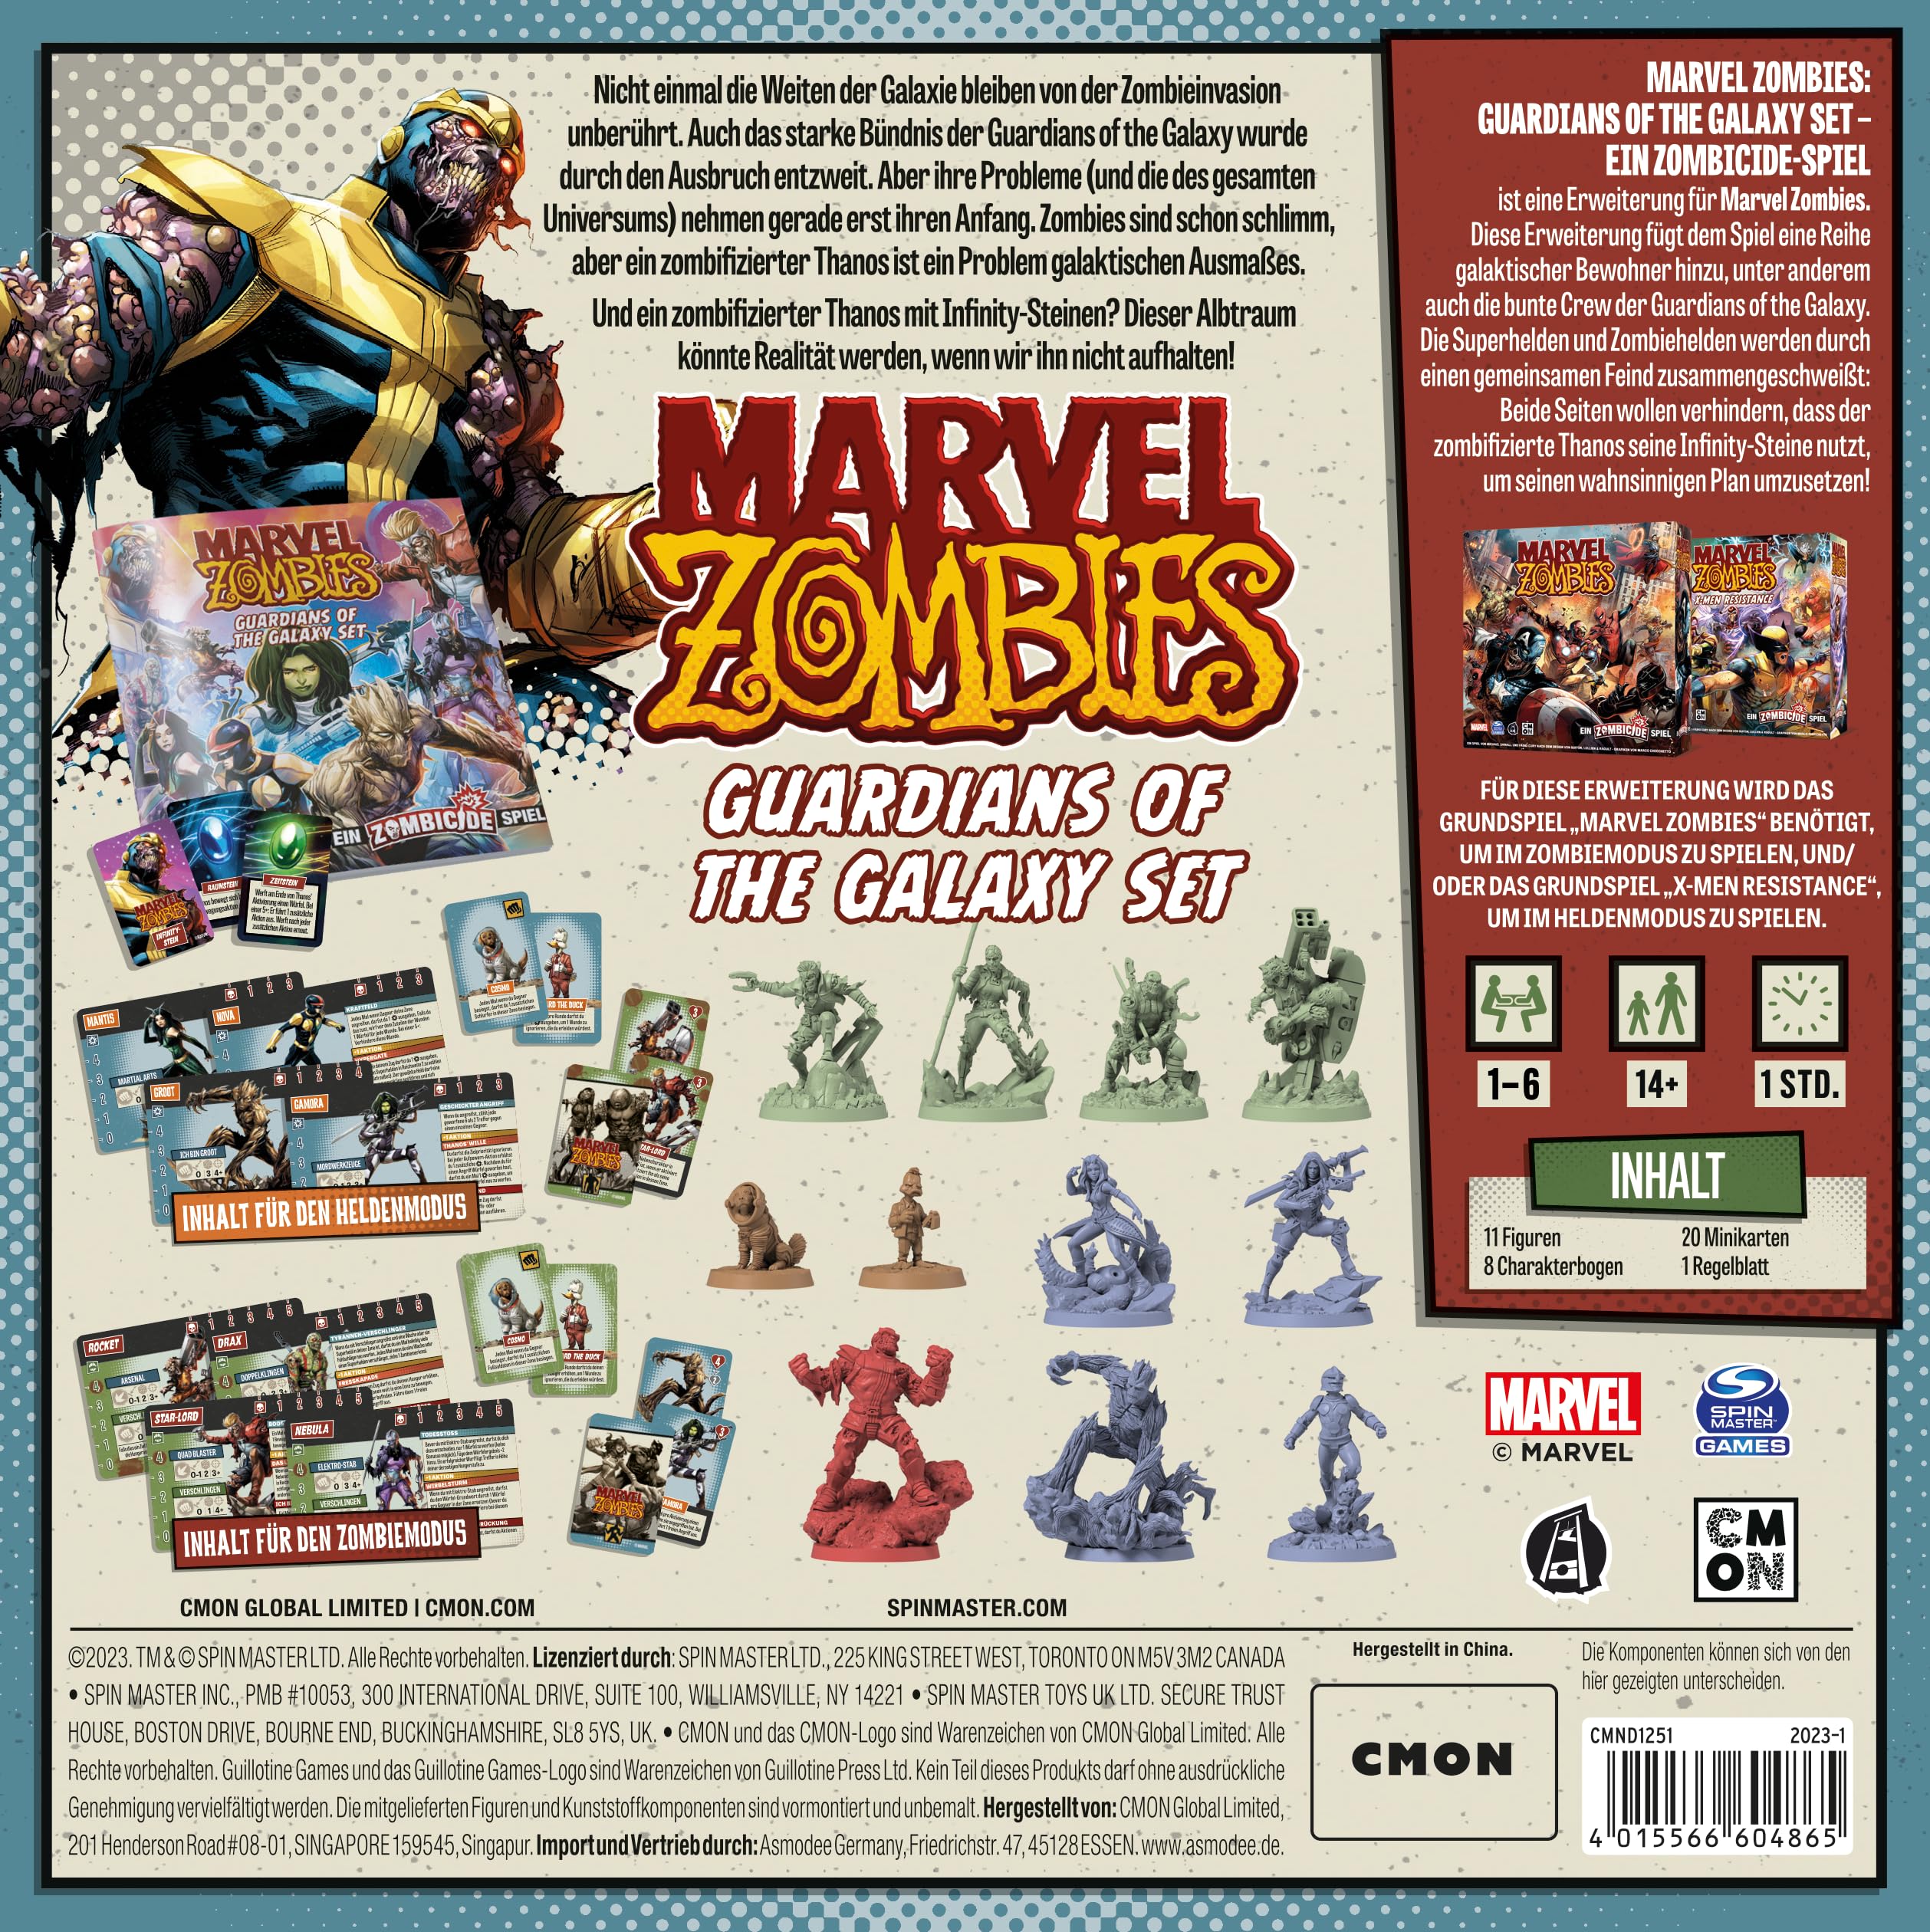 CMON Marvel Zombies: Guardians of the Galaxy - A Zombicide Game Expansion Connoisseur Game Dungeon Crawler 1-6 Players from 14+ Years 60 Minutes German